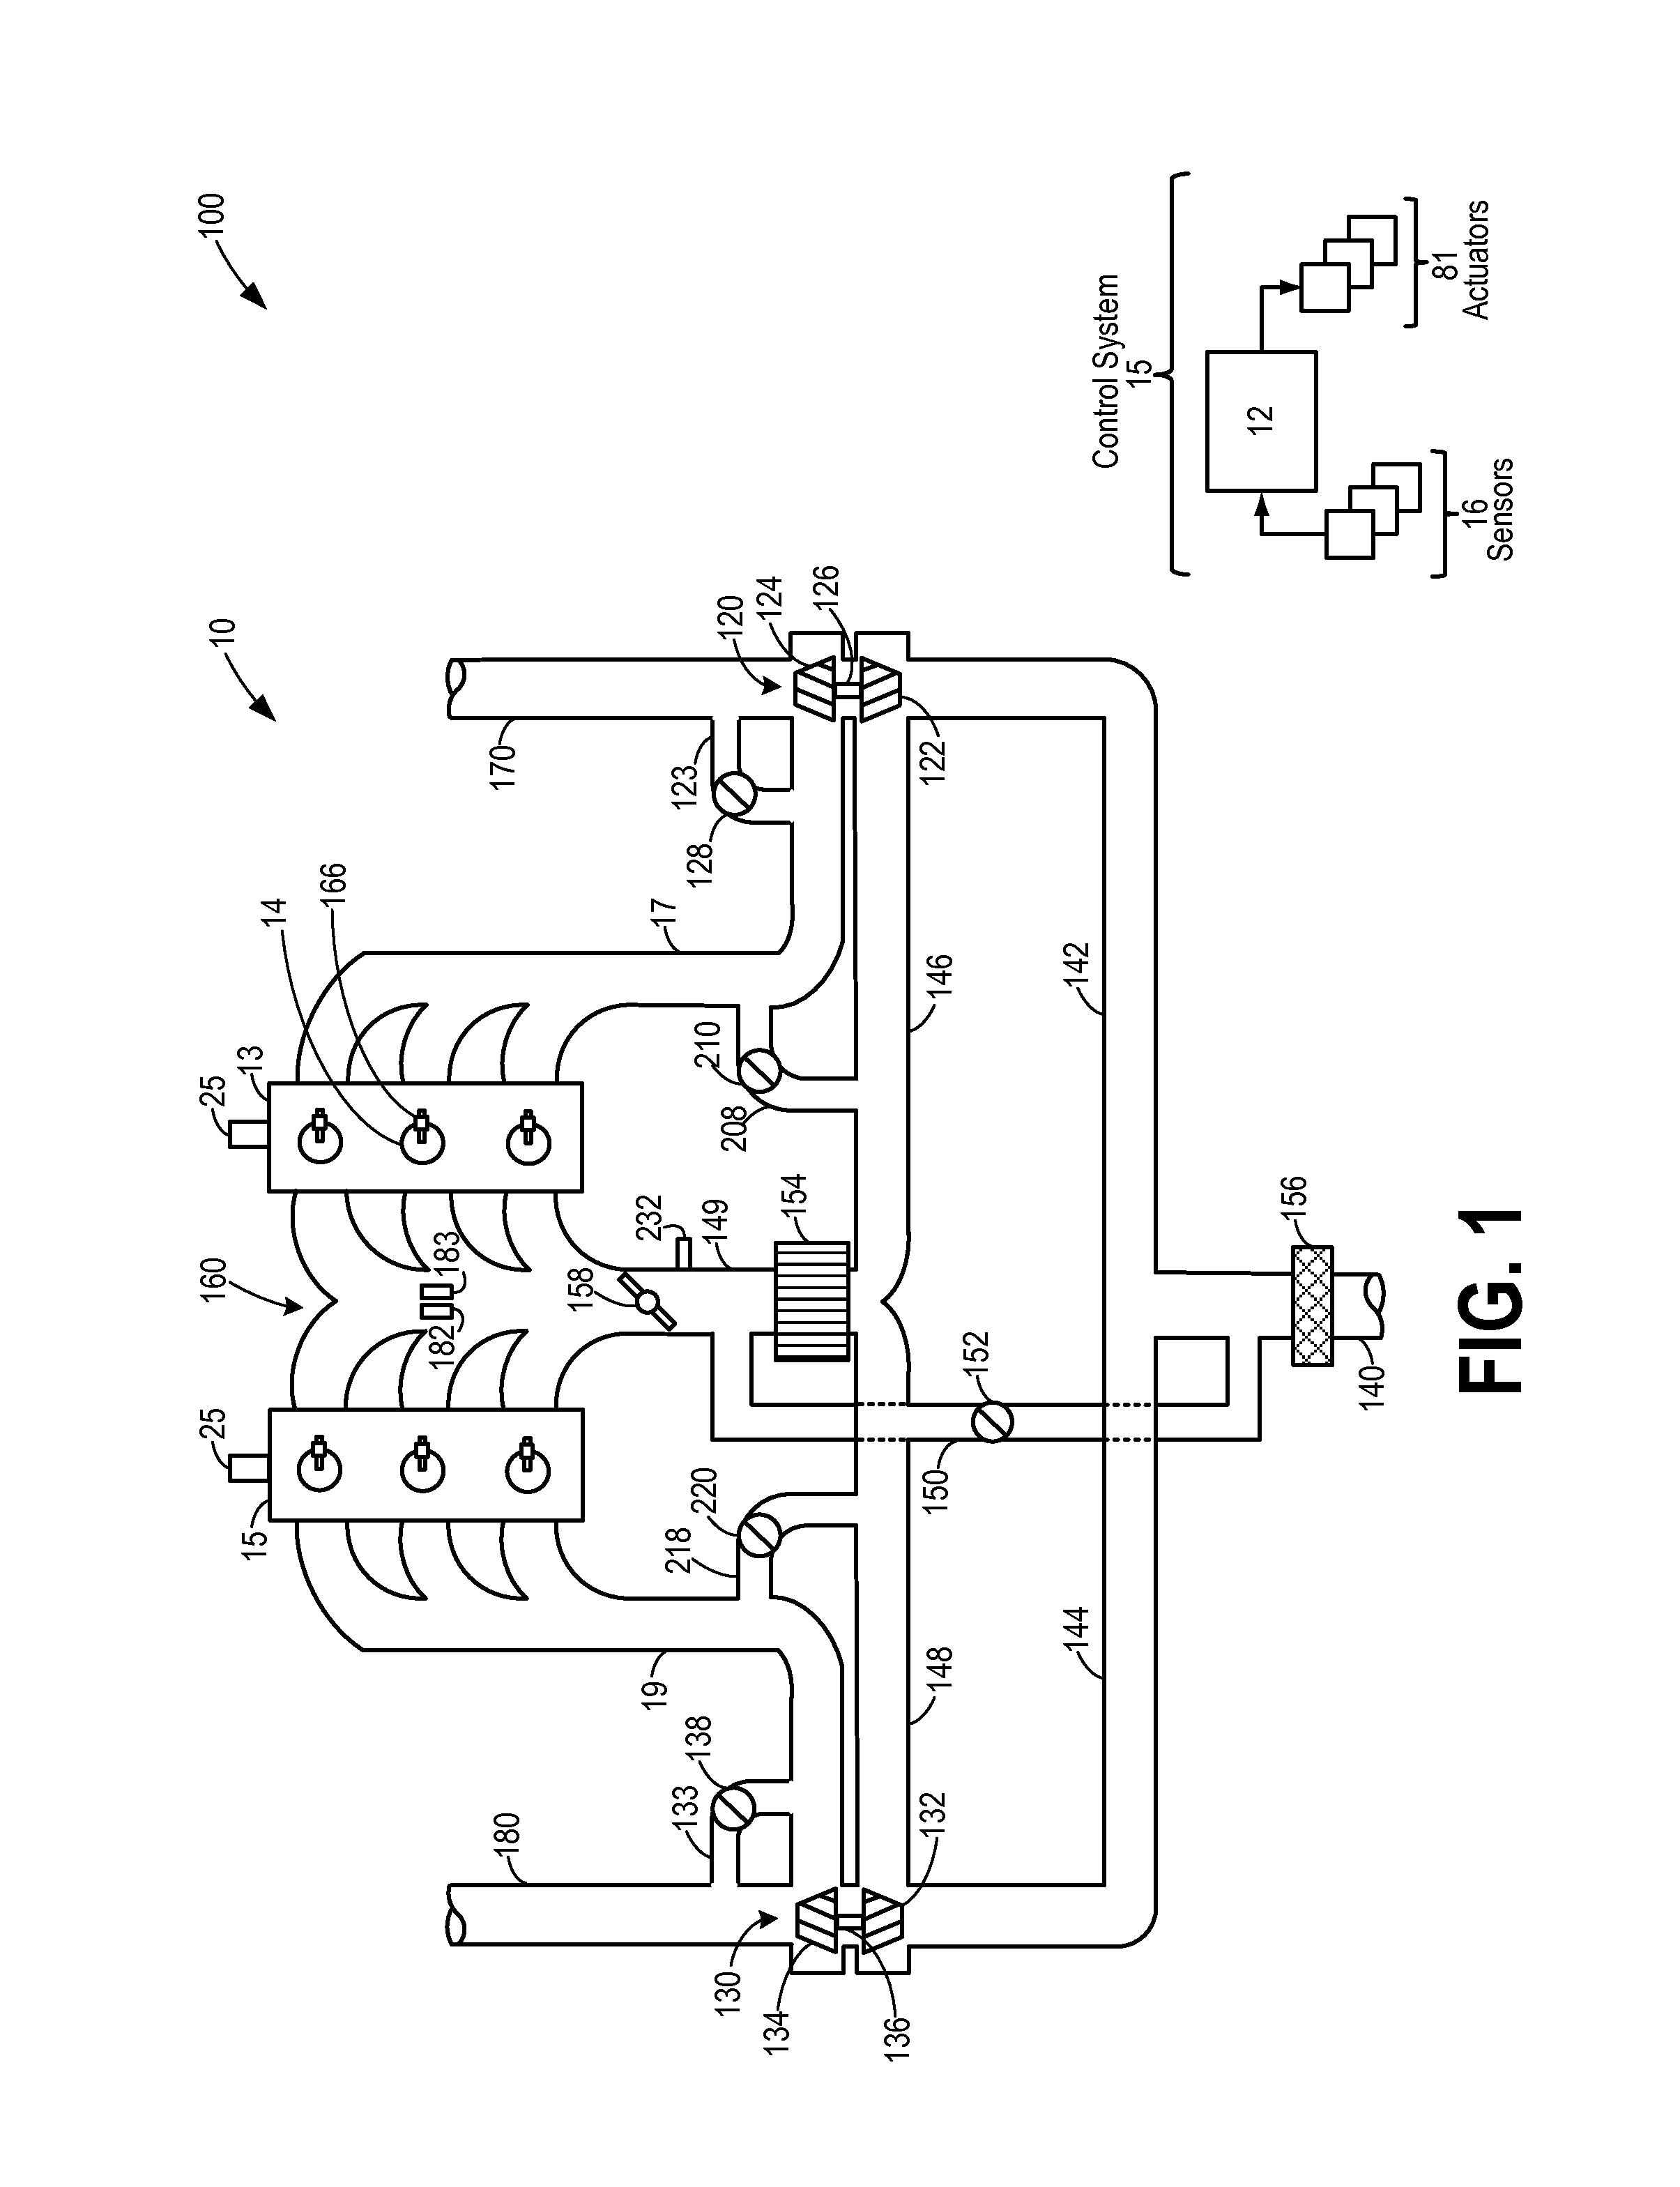 Methods and systems for boost control